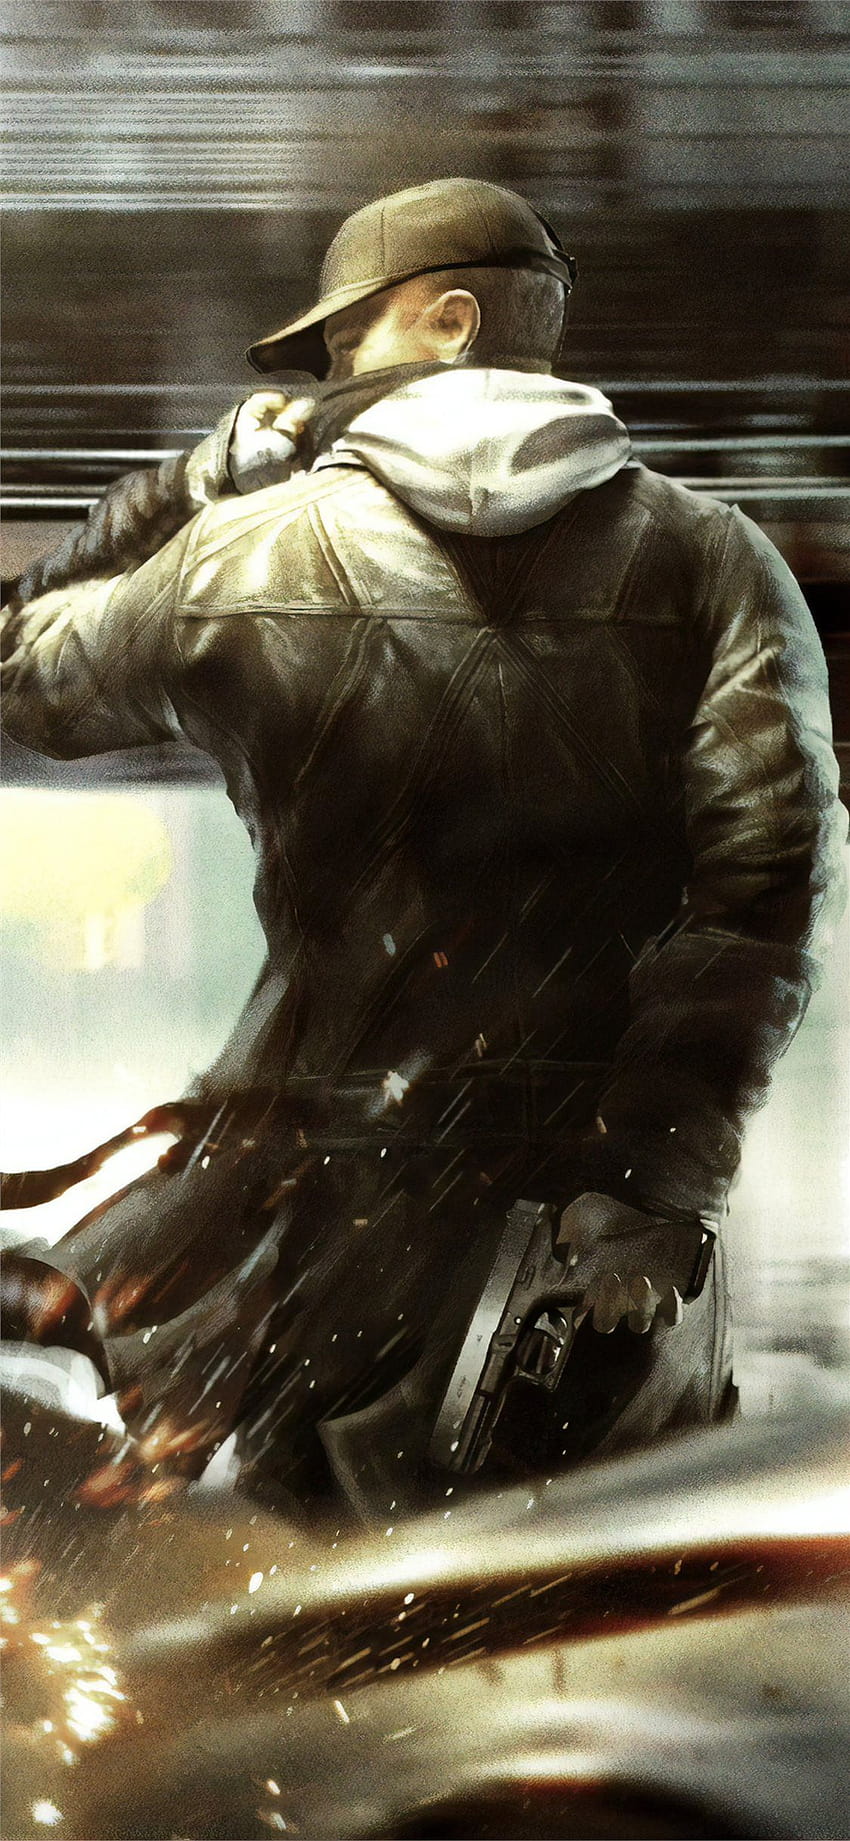 Watch dogs 1 character iPhone X, watch dog 1 android HD phone wallpaper |  Pxfuel